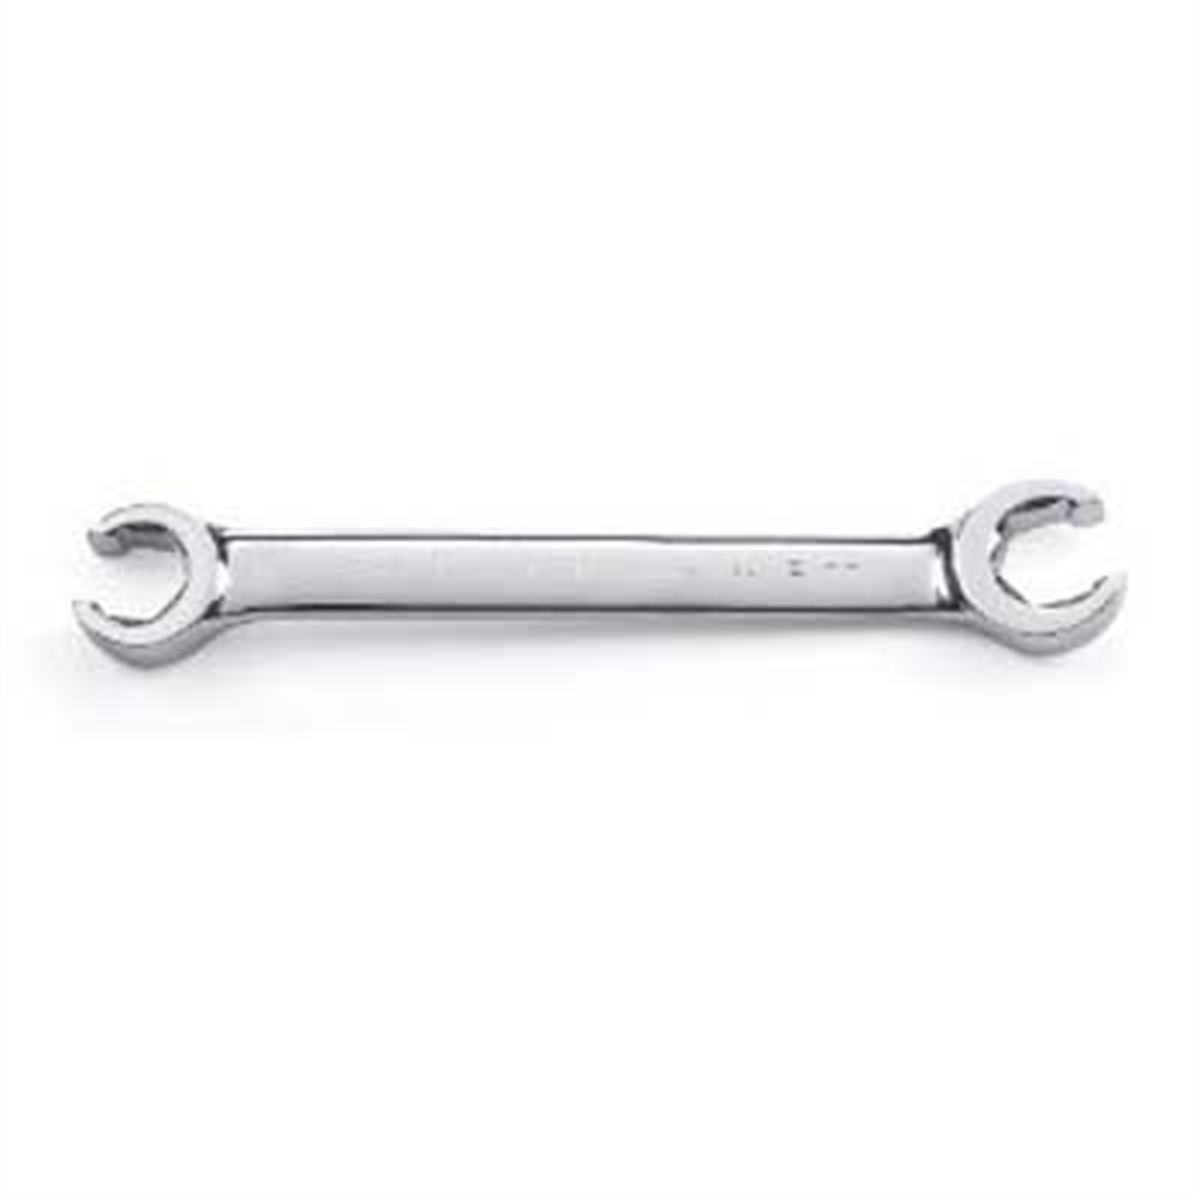 Polished Chrome Flare Nut Wrench - 9 mm x 11 mm